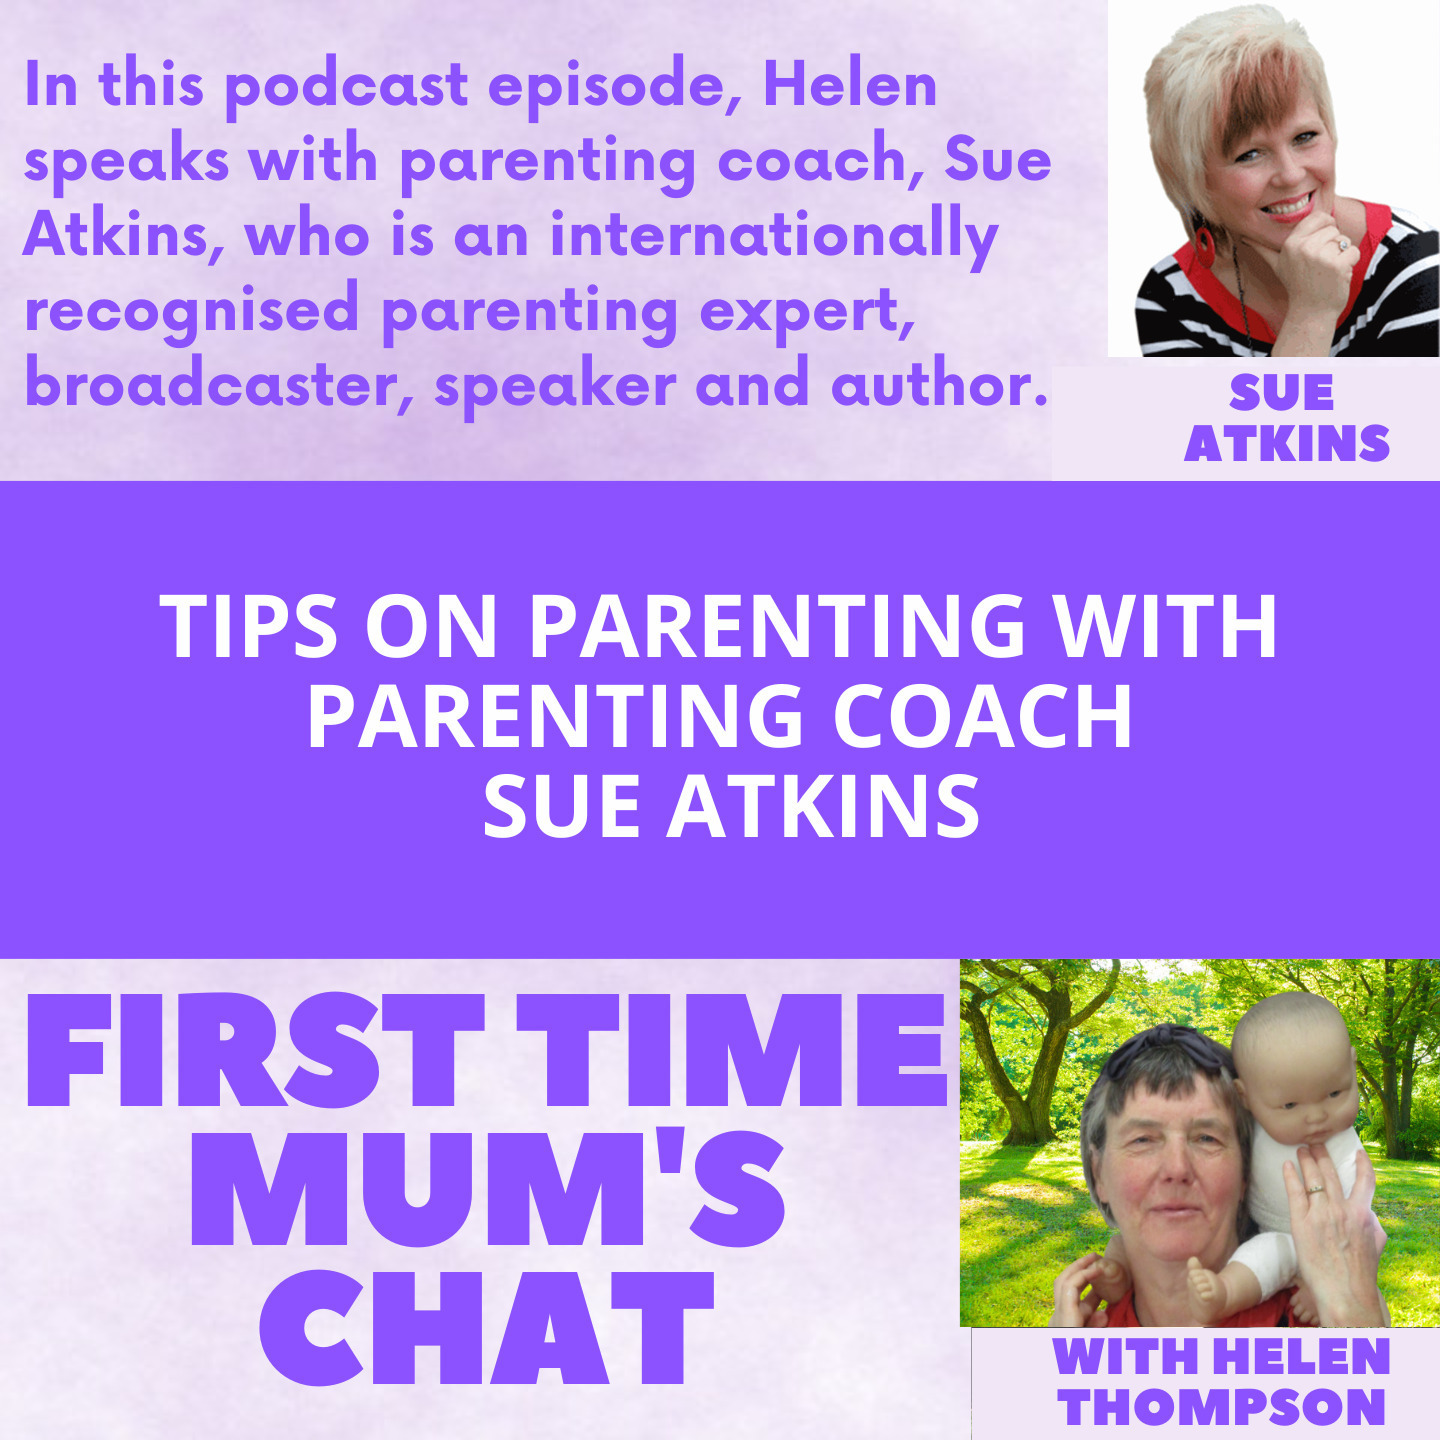 Tips on Parenting With Parenting Coach Sue Atkins